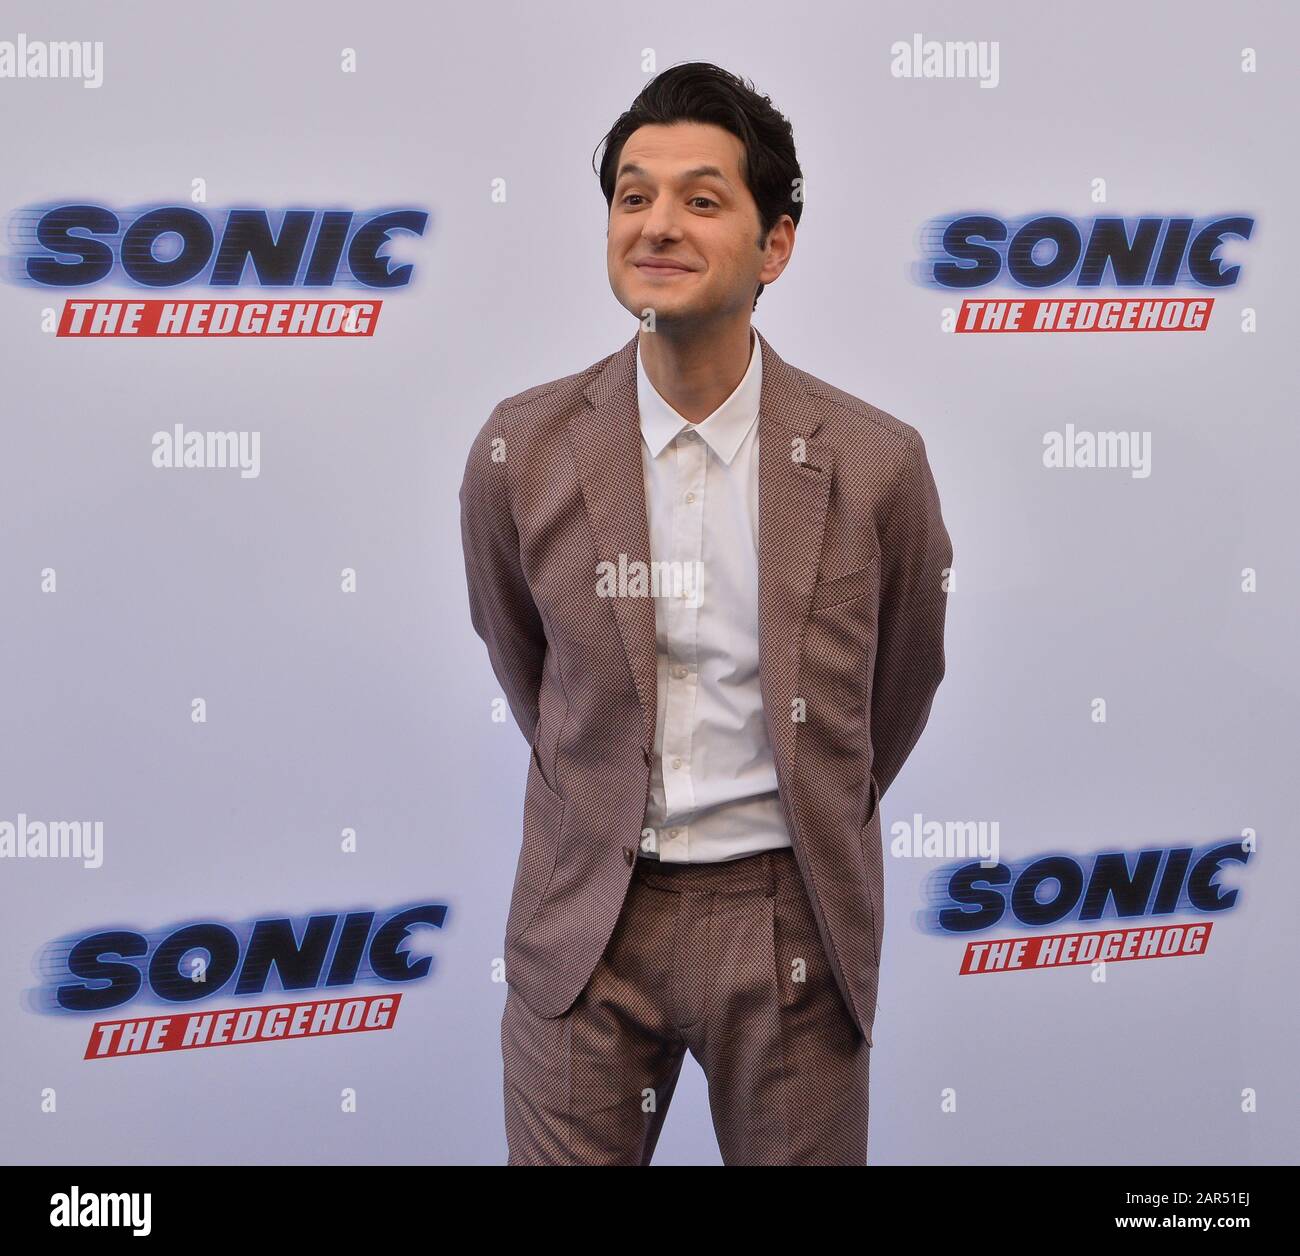 Cast member Ben Schwartz attends the 'Sonic the Hedgehog' family day event on the Paramount Pictures lot in Los Angeles on Saturday, January 25, 2020. Storyline: Based on the global blockbuster videogame franchise from Sega, 'Sonic the Hedgehog' tells the story of the world's speediest hedgehog as he embraces his new home on Earth. Photo by Jim Ruymen/UPI Credit: UPI/Alamy Live News Stock Photo